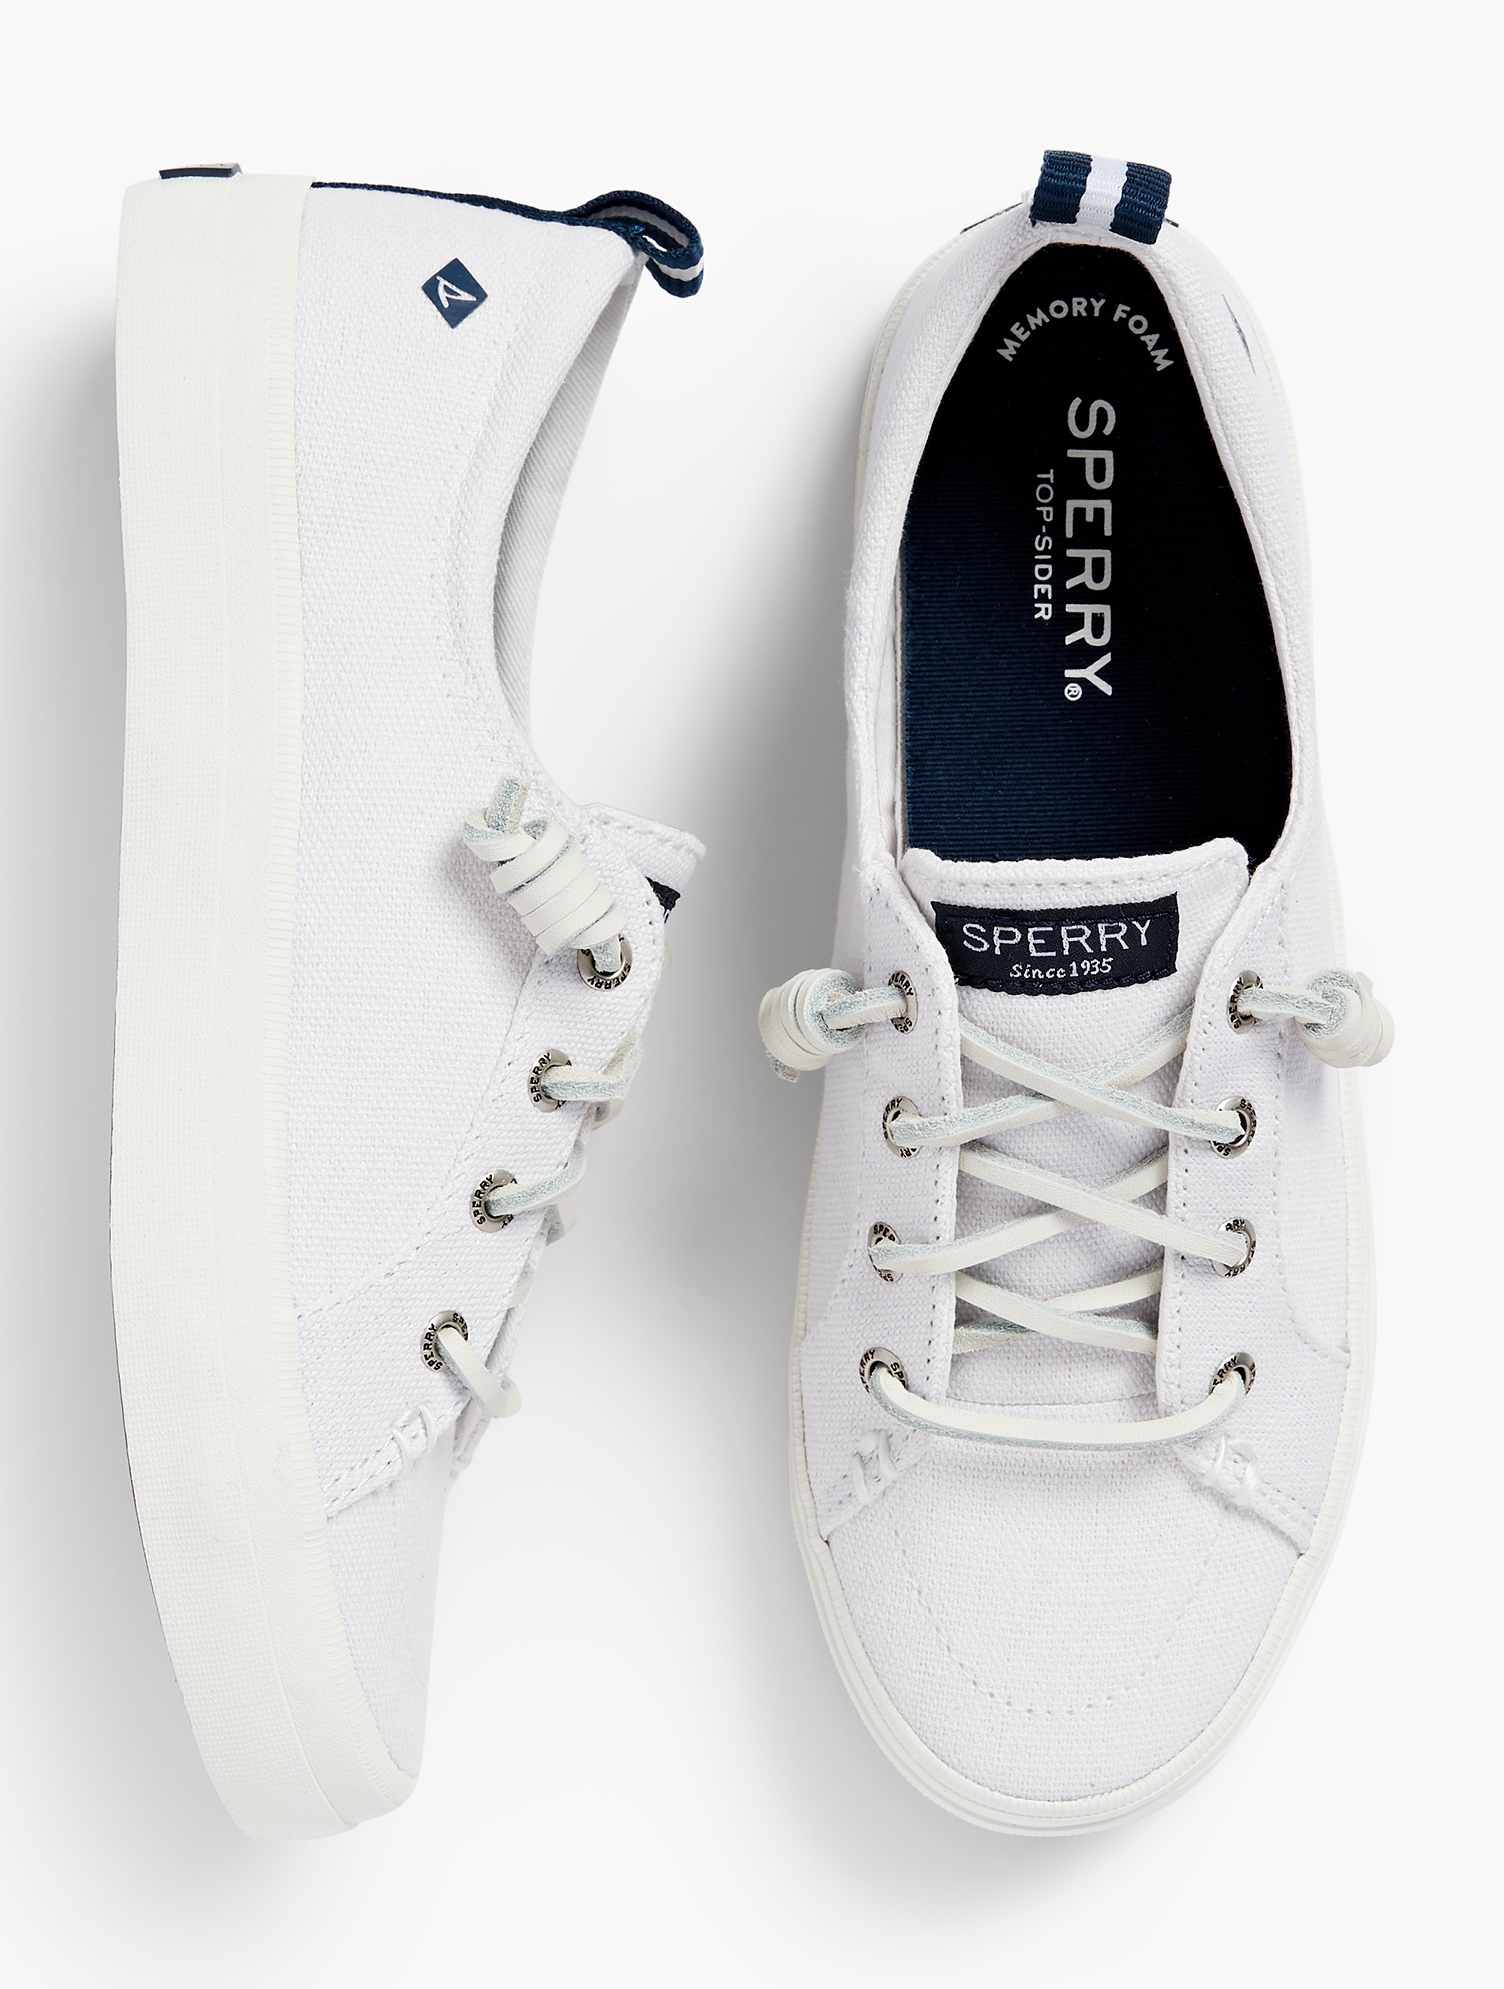 Sperry Crest Vibe Sneakers - Solid - White - 9 1/2 M - 100% Cotton Talbots